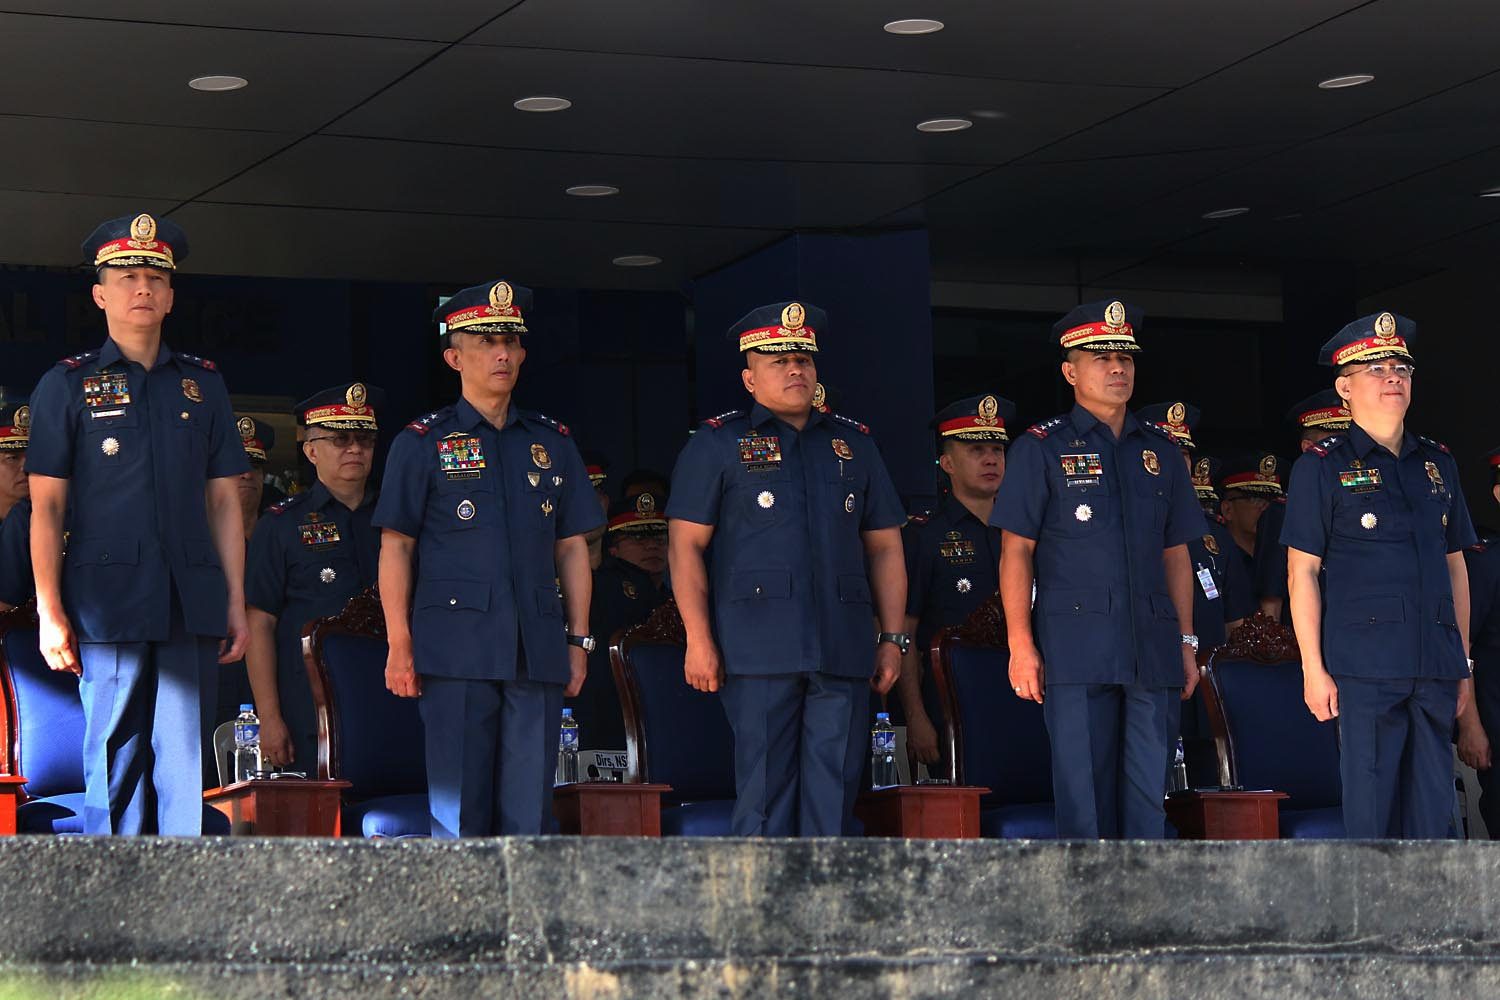 PNP subpoena powers only for ‘extreme’ circumstances – Roque